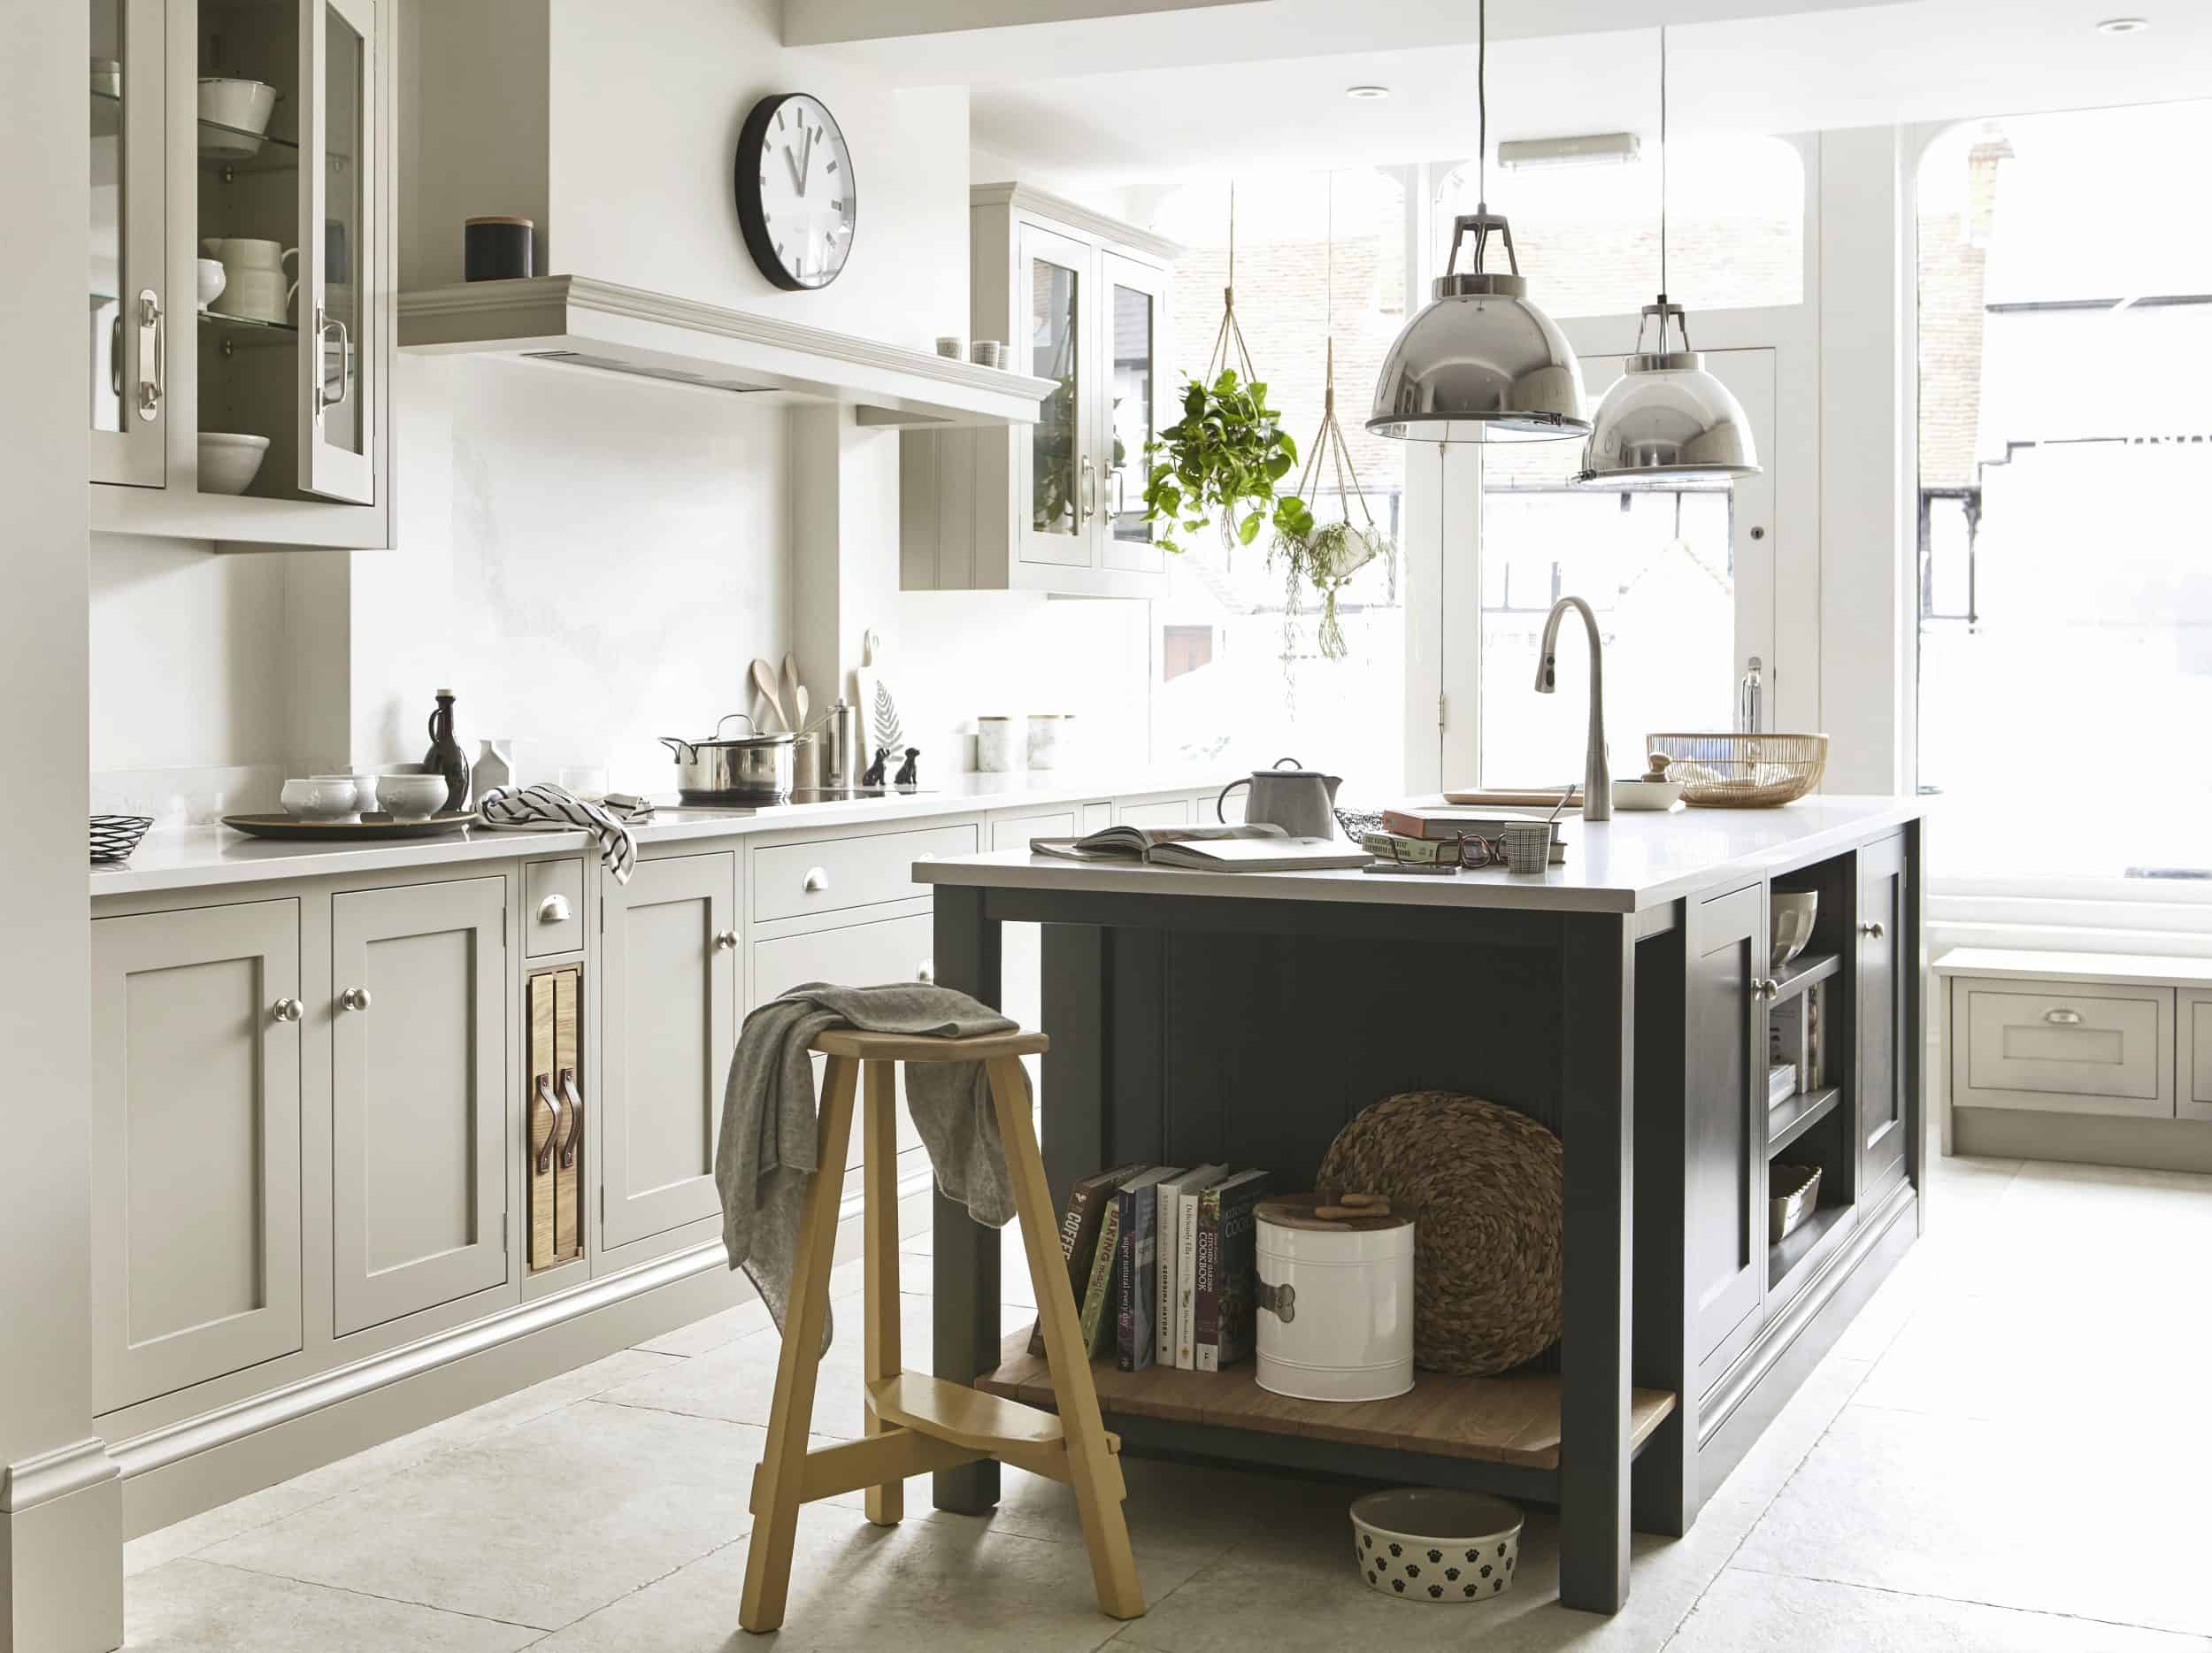 Classic Shaker Kitchen John Lewis of Hungerford